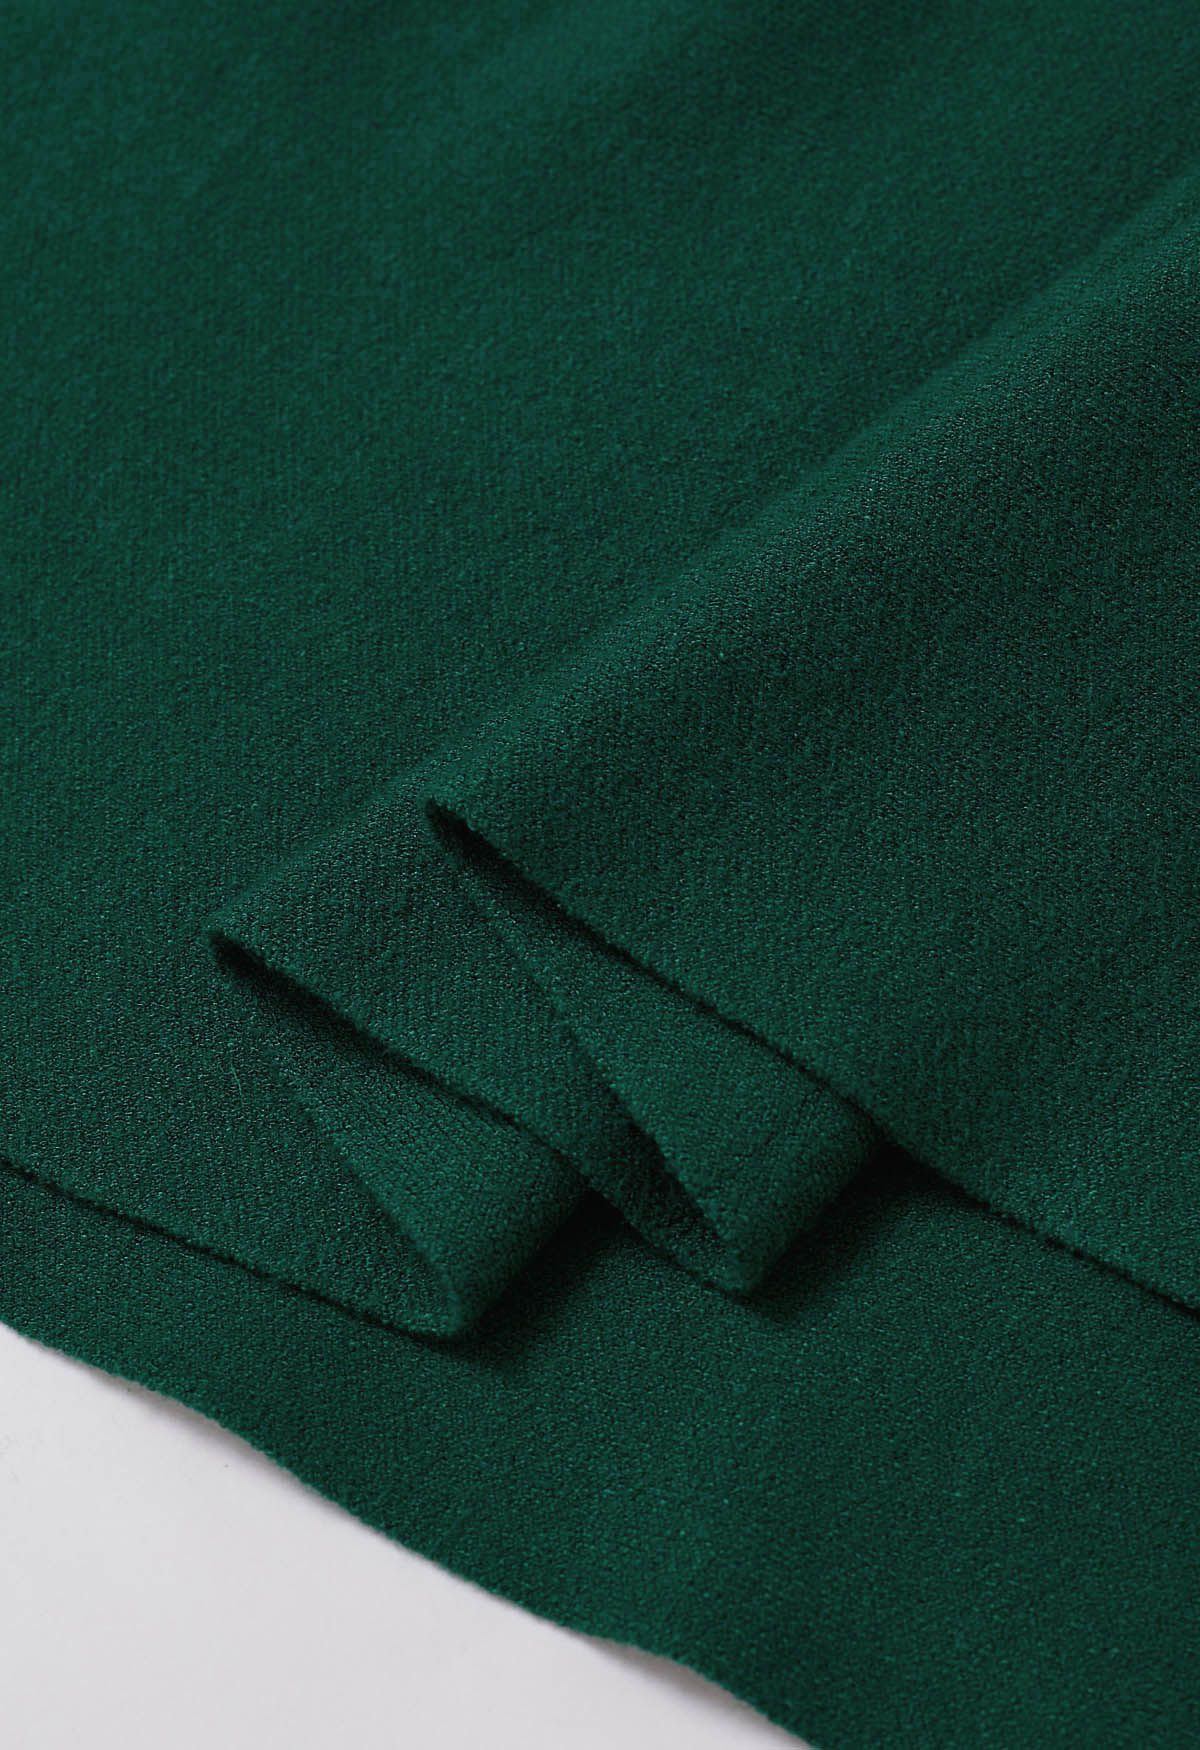 Solid Color A-Line Knit Midi Skirt in Dark Green